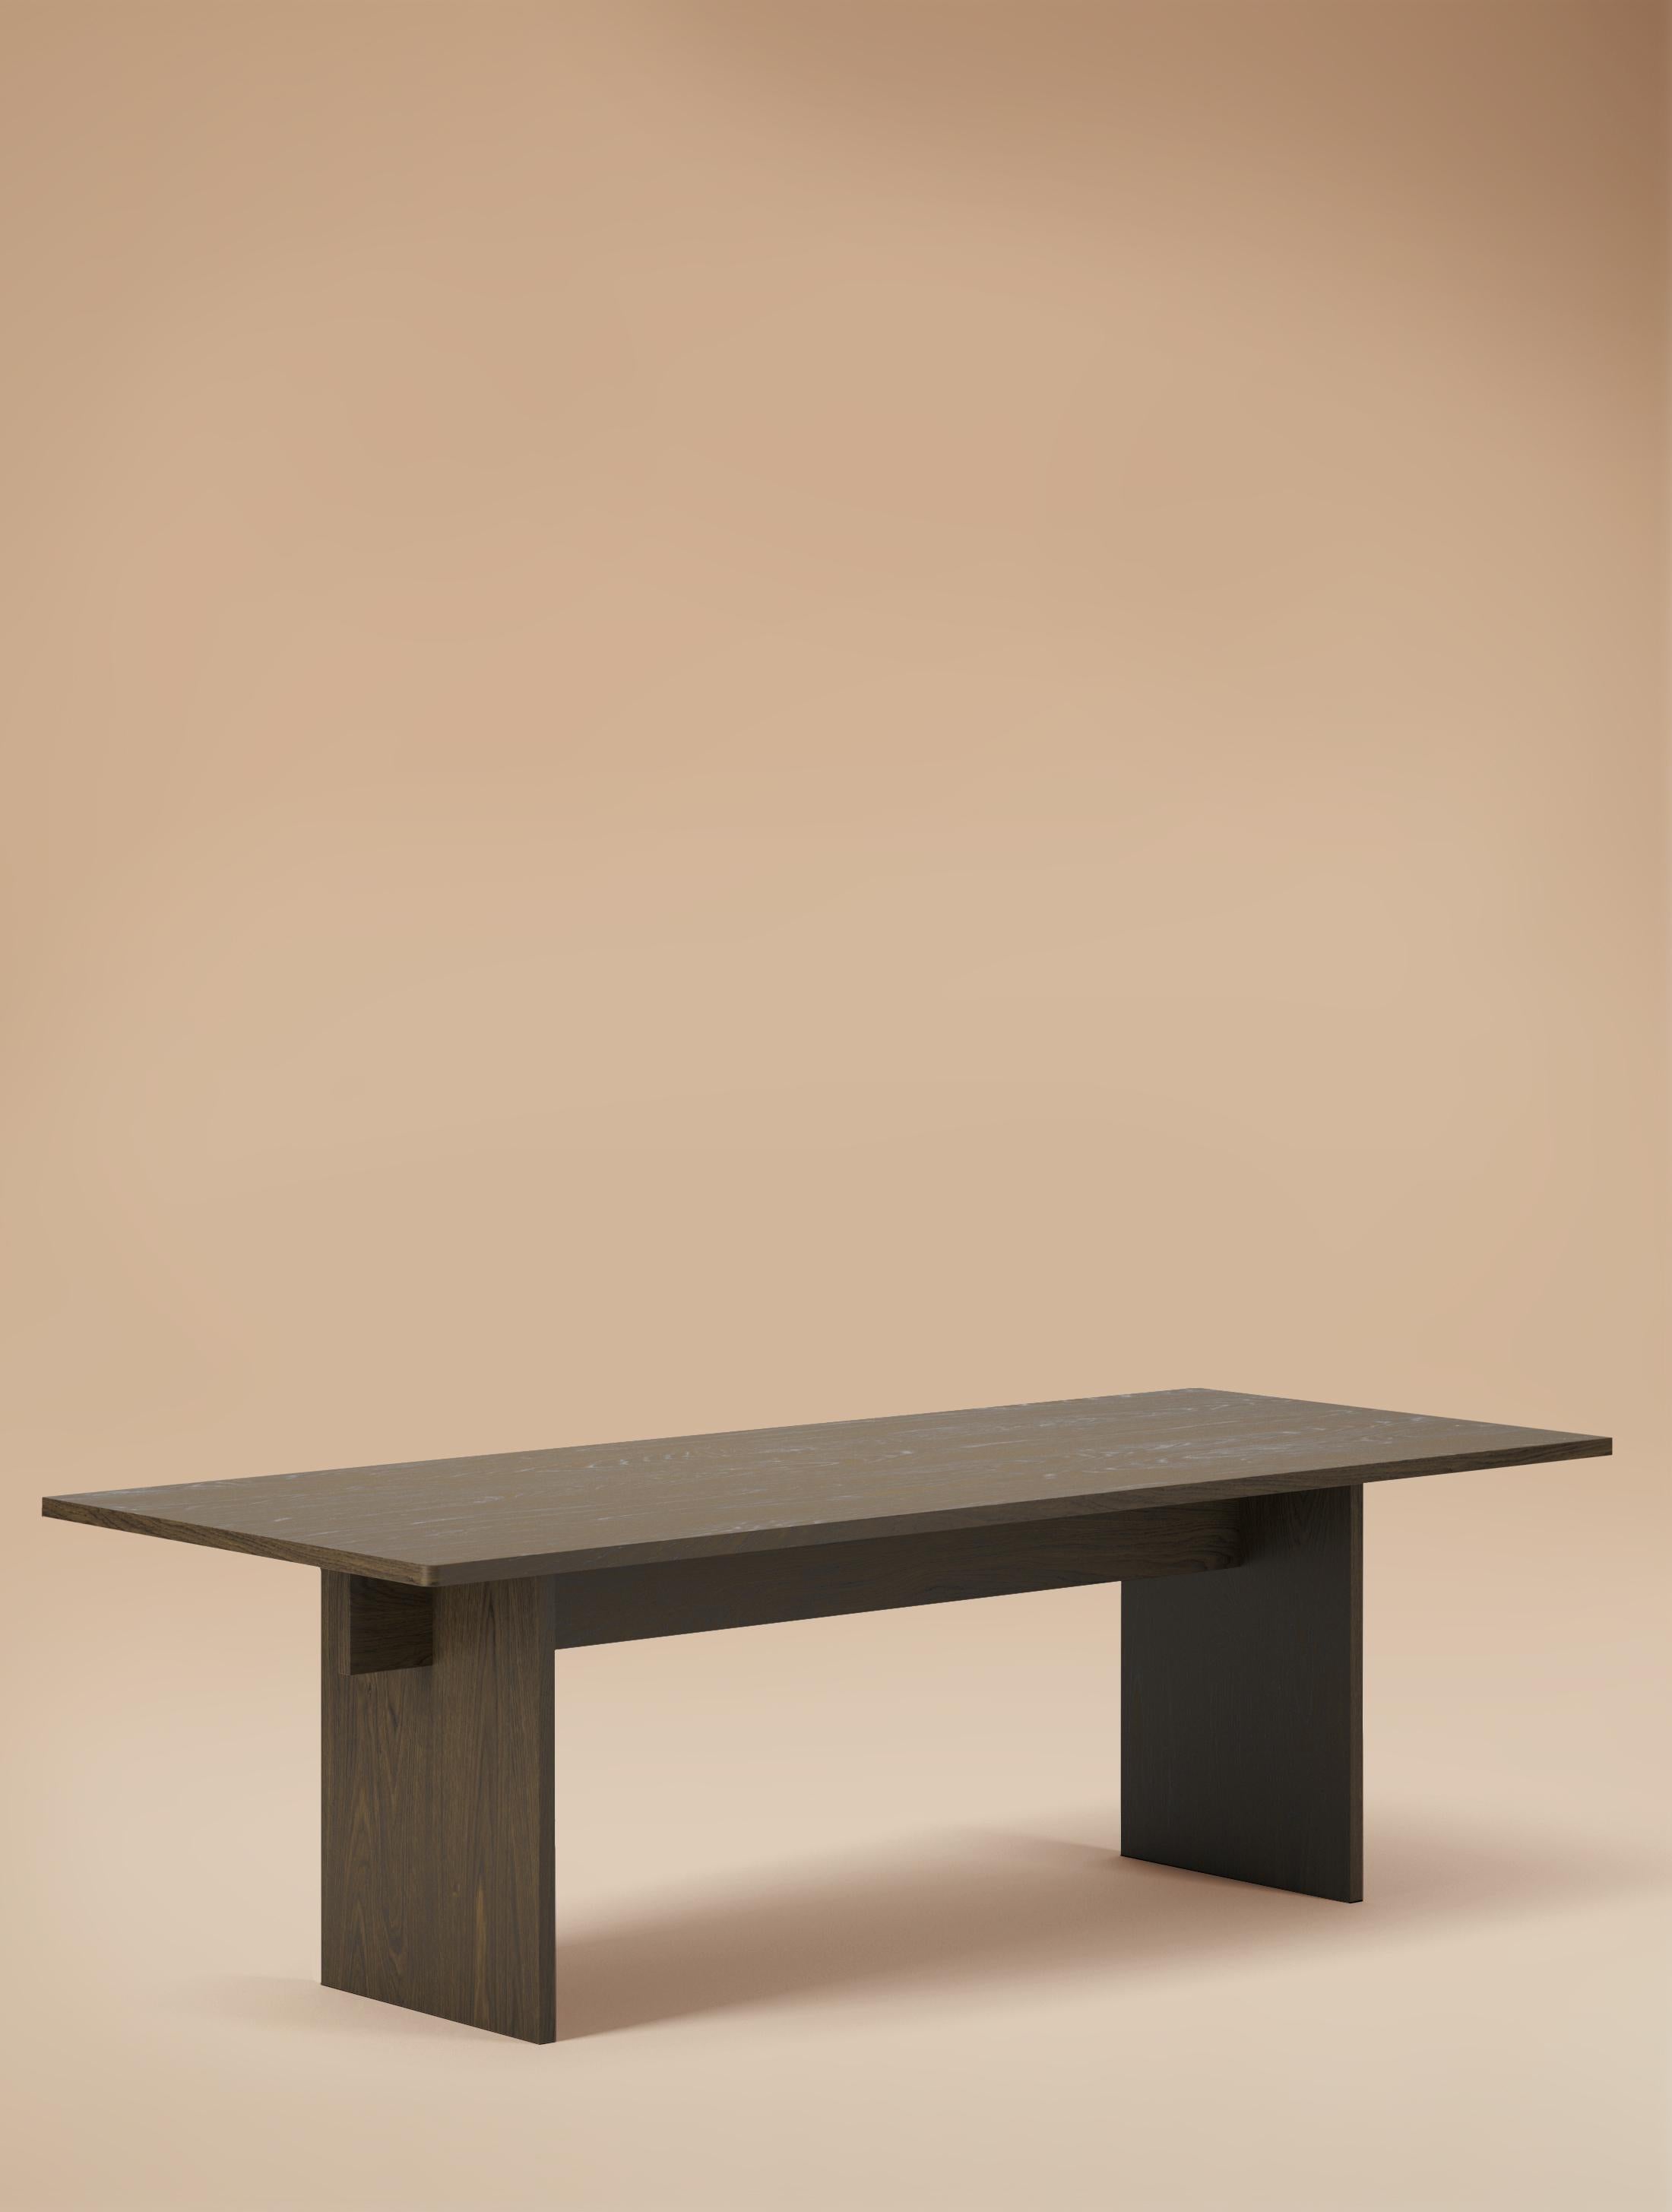 Contemporary 6 Seater Faure Table Handcrafted in Blackened Oiled Oak by Lemon